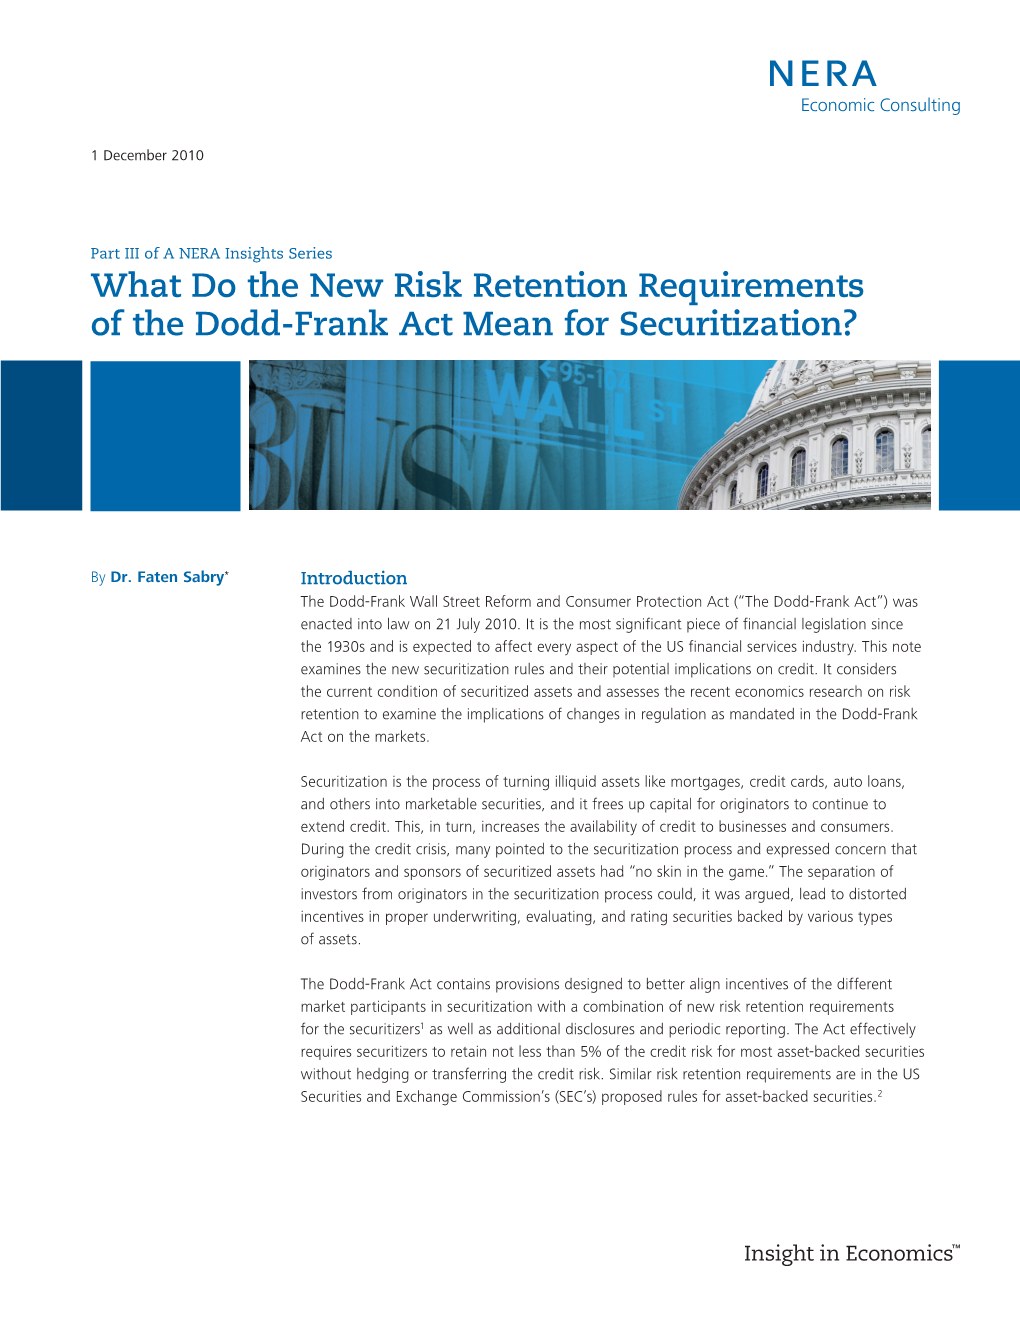 What Do the New Risk Retention Requirements of the Dodd-Frank Act Mean for Securitization?